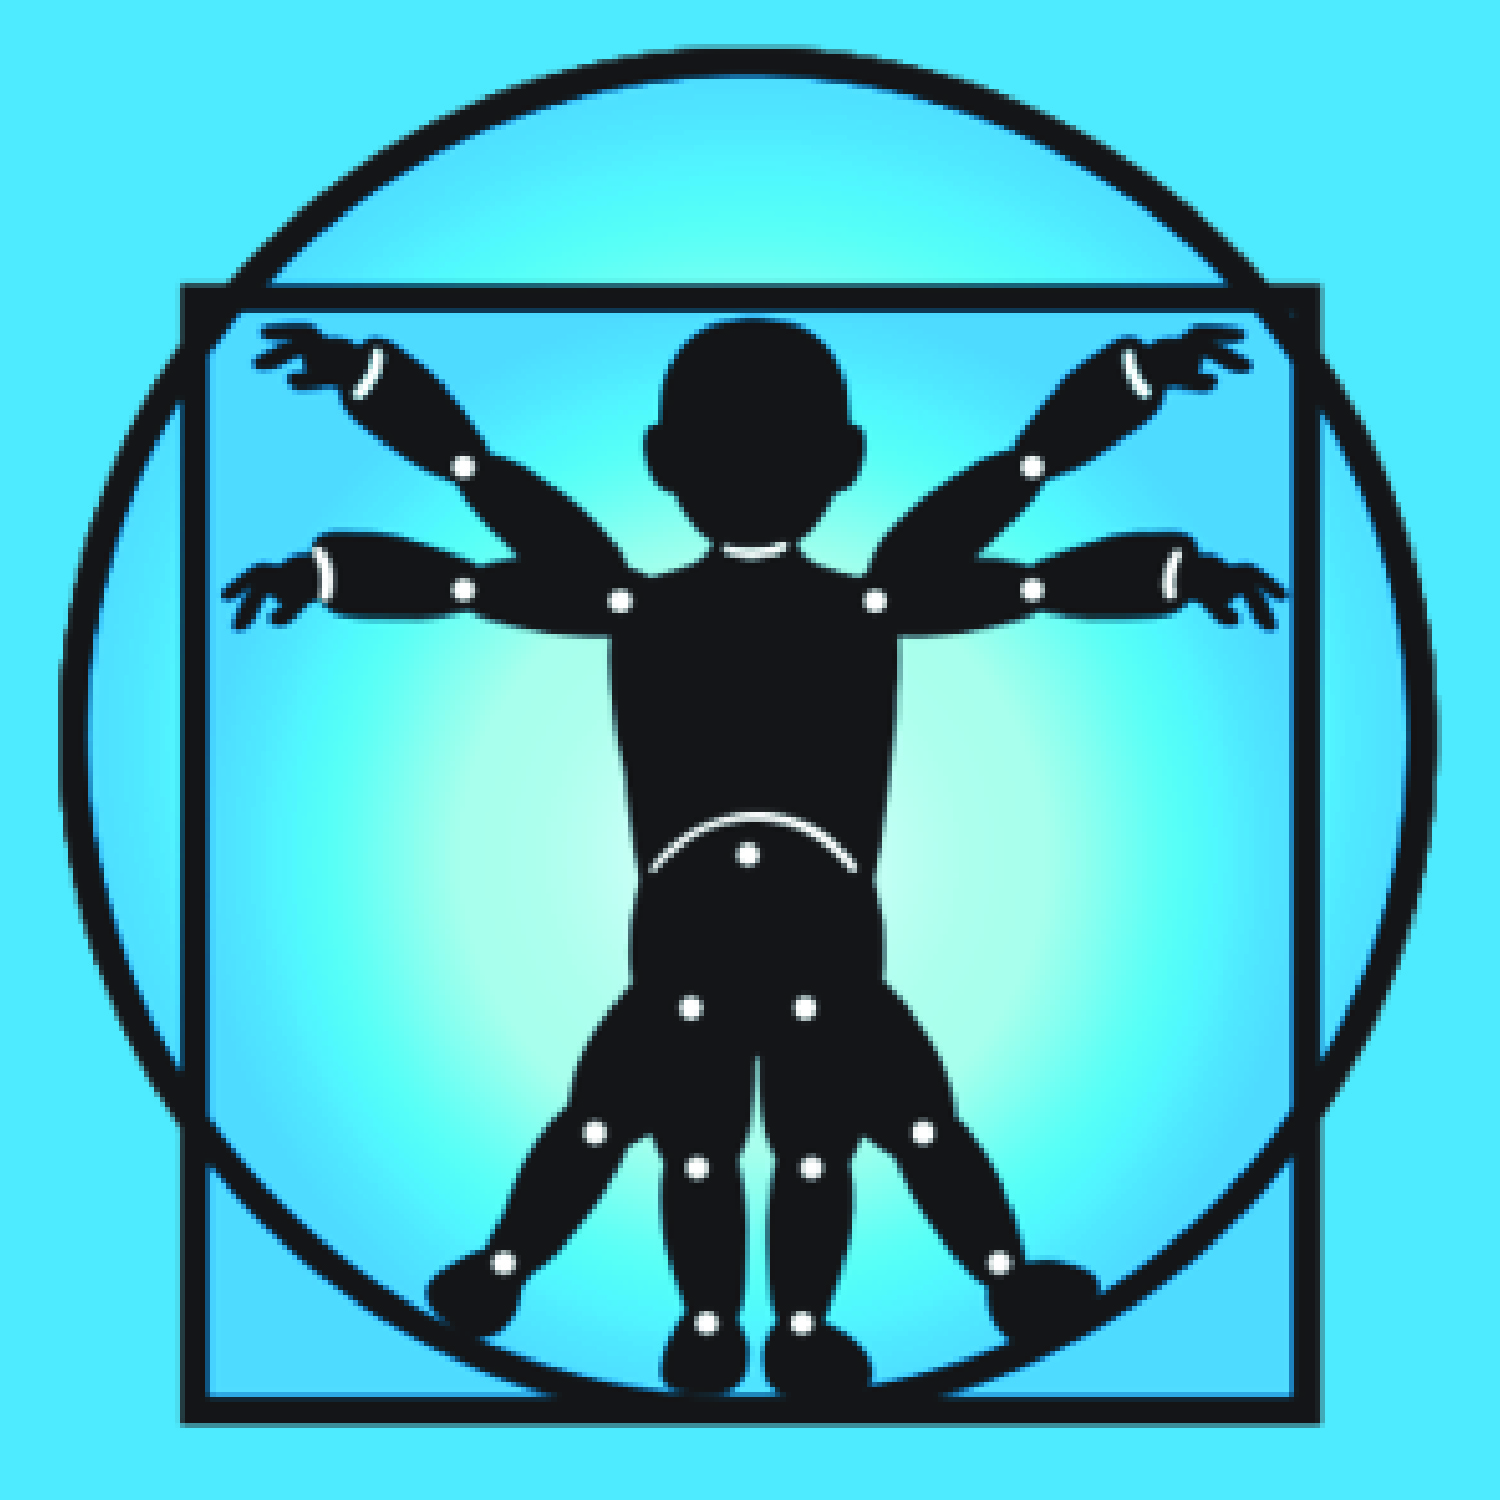 Man in circle and square who appears to be an articulated puppet